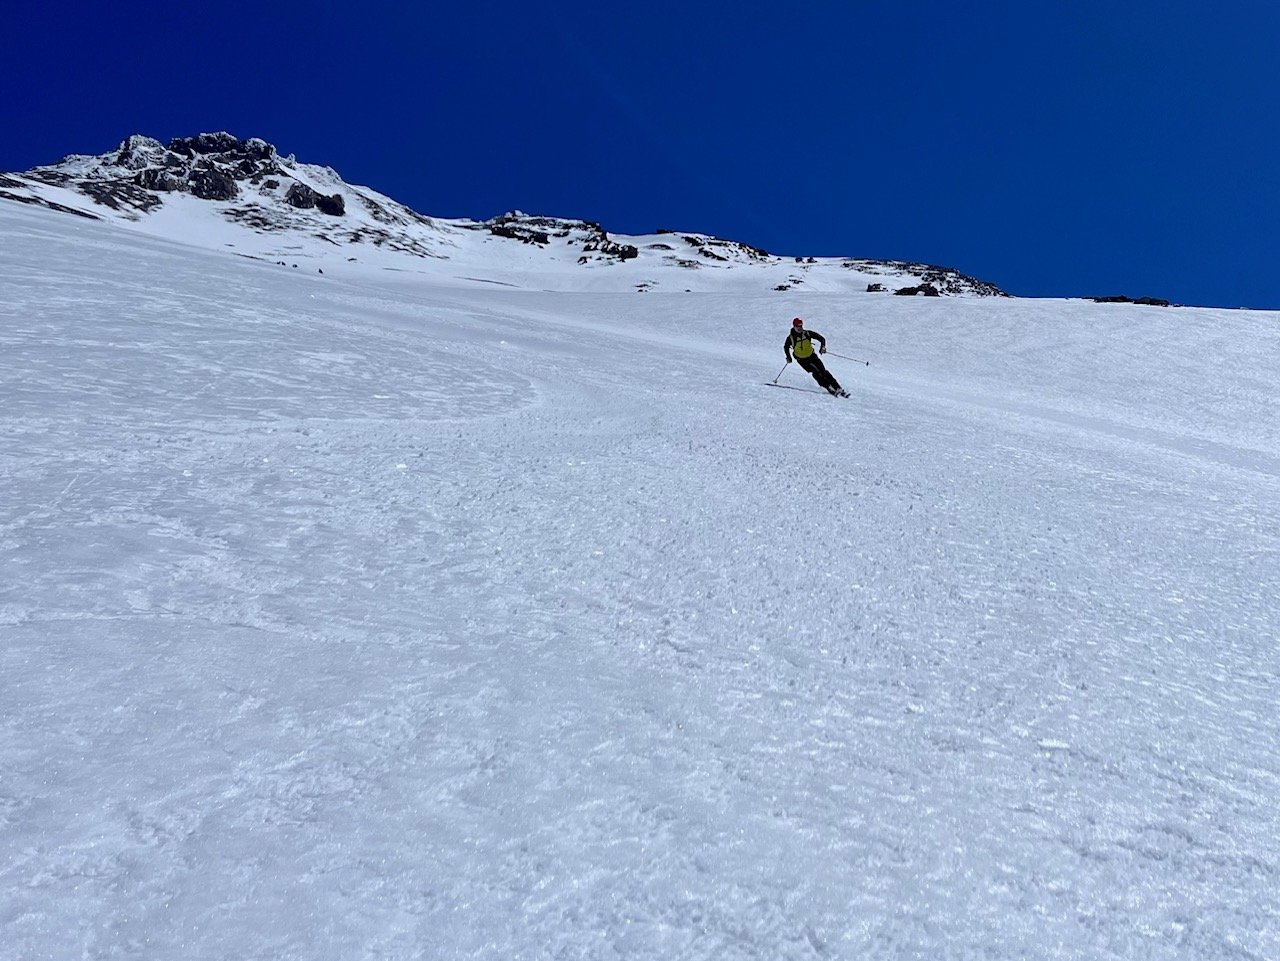 Skiing down mt shasta with the peak of mt shasta in the background